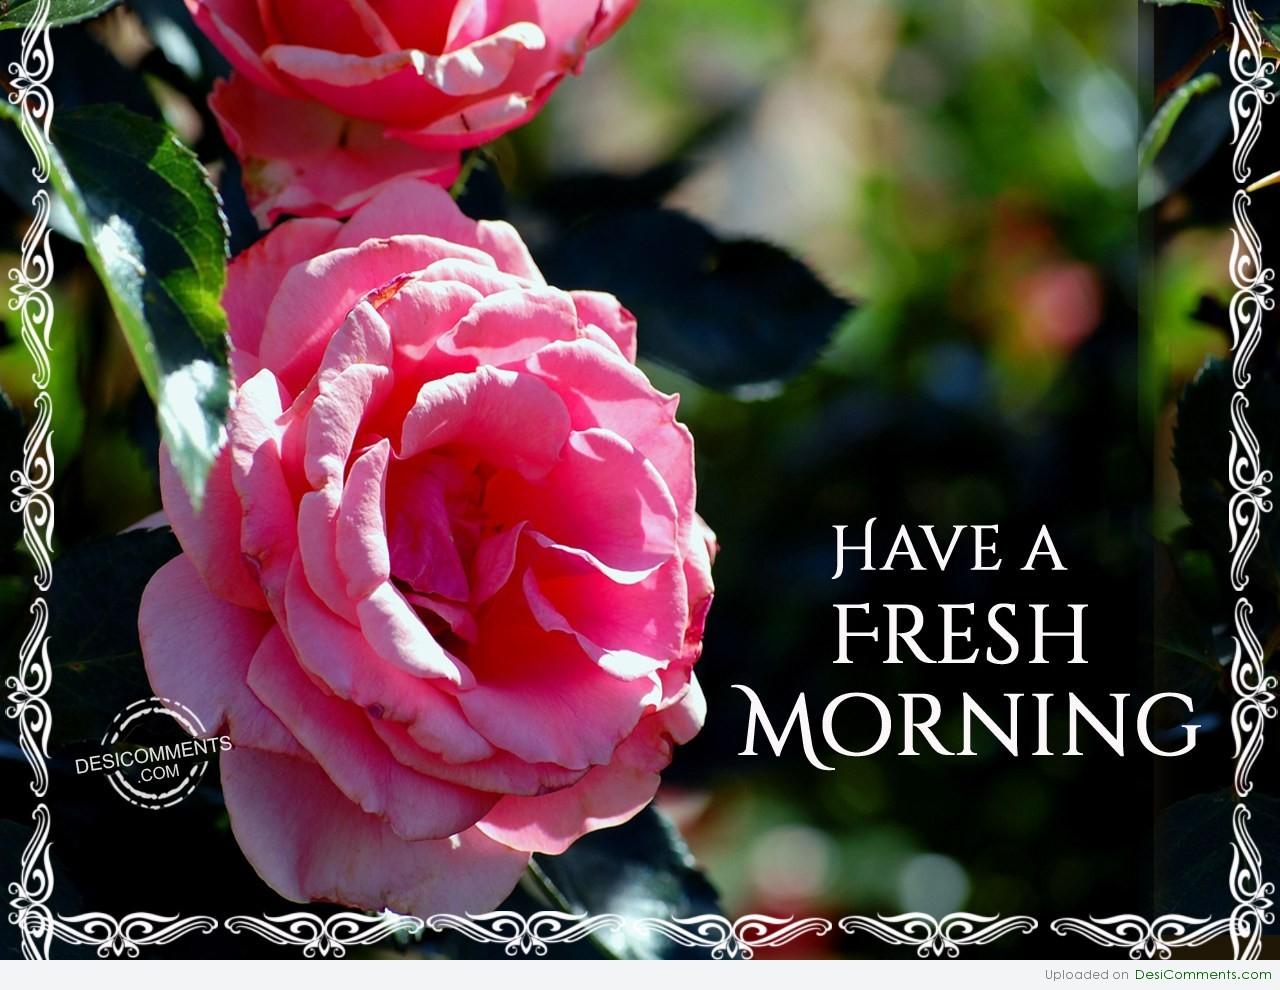 Have A Fresh Morning - DesiComments.com